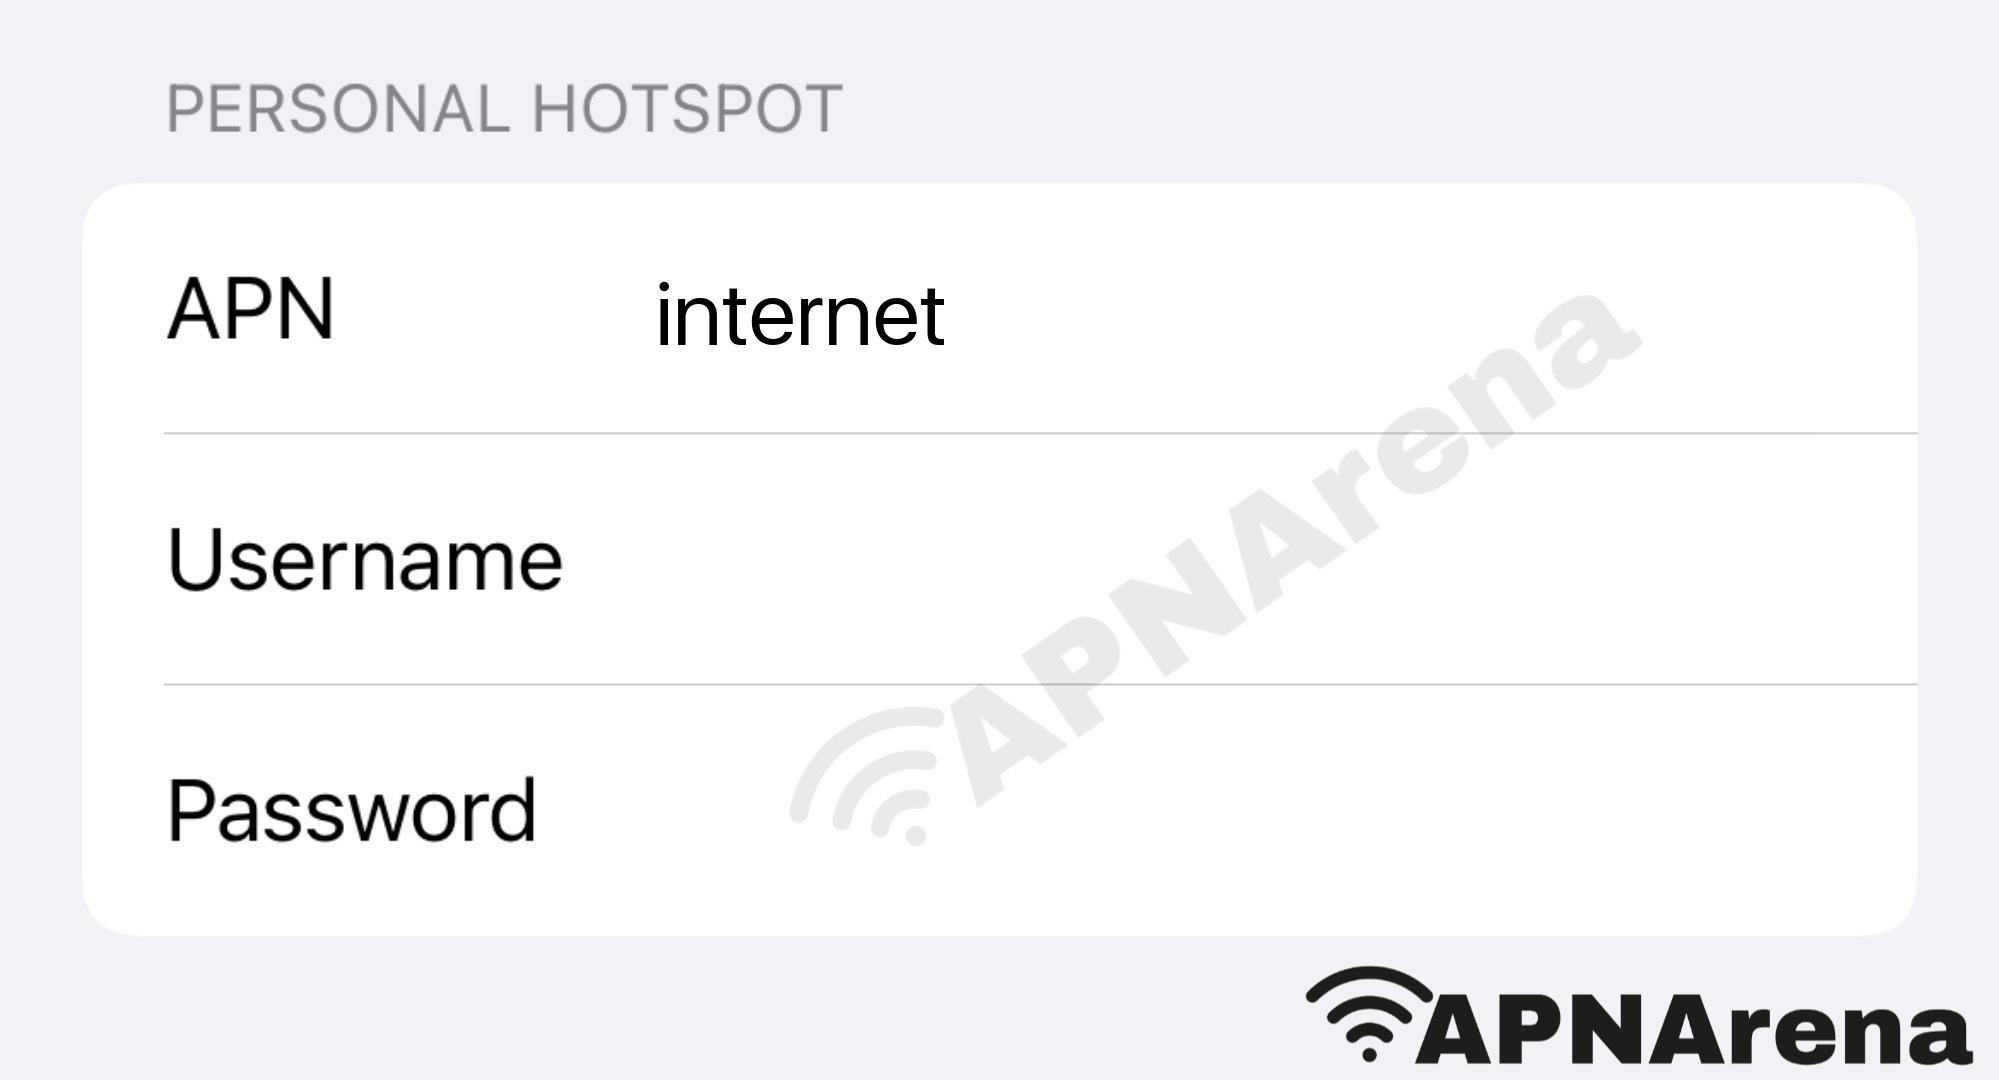 C Mobile Personal Hotspot Settings for iPhone